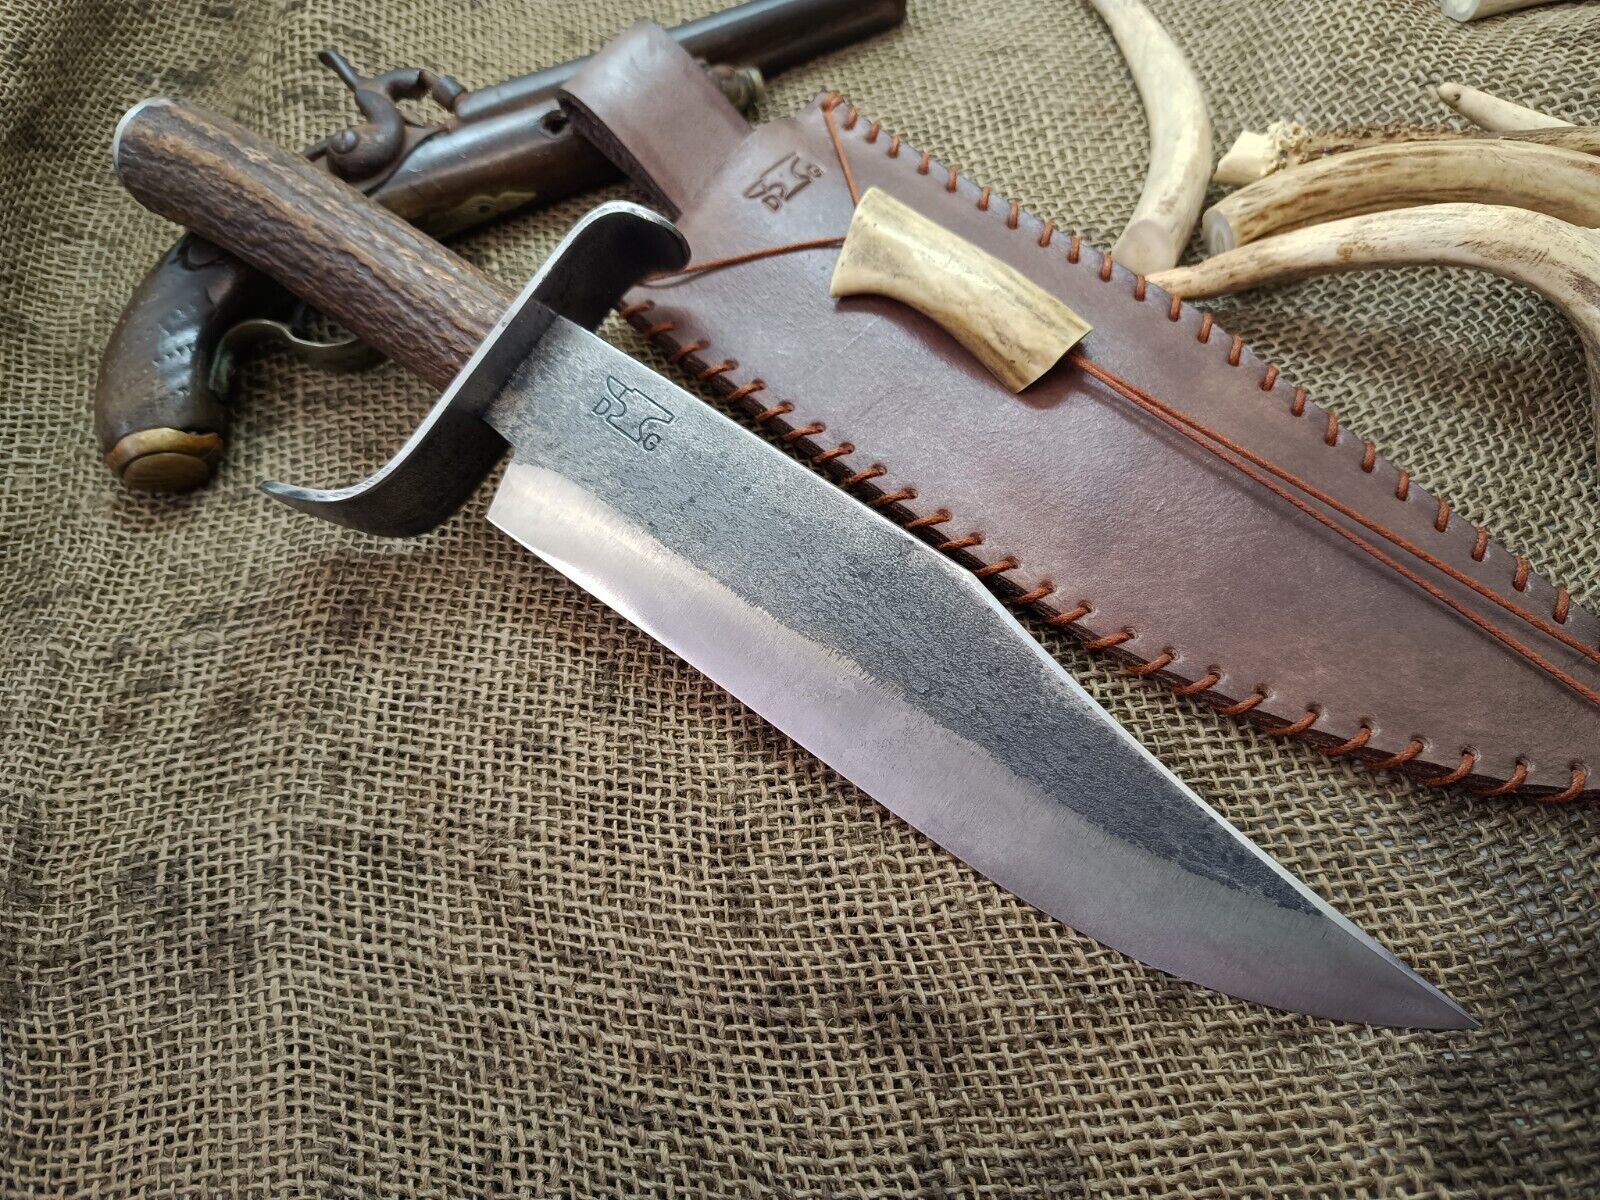 BIG GAUCHO KNIFE FORGED OLD WEST  BOWIE COWBOY FRONTIER RANGERS TEXAS HUNTER EDC